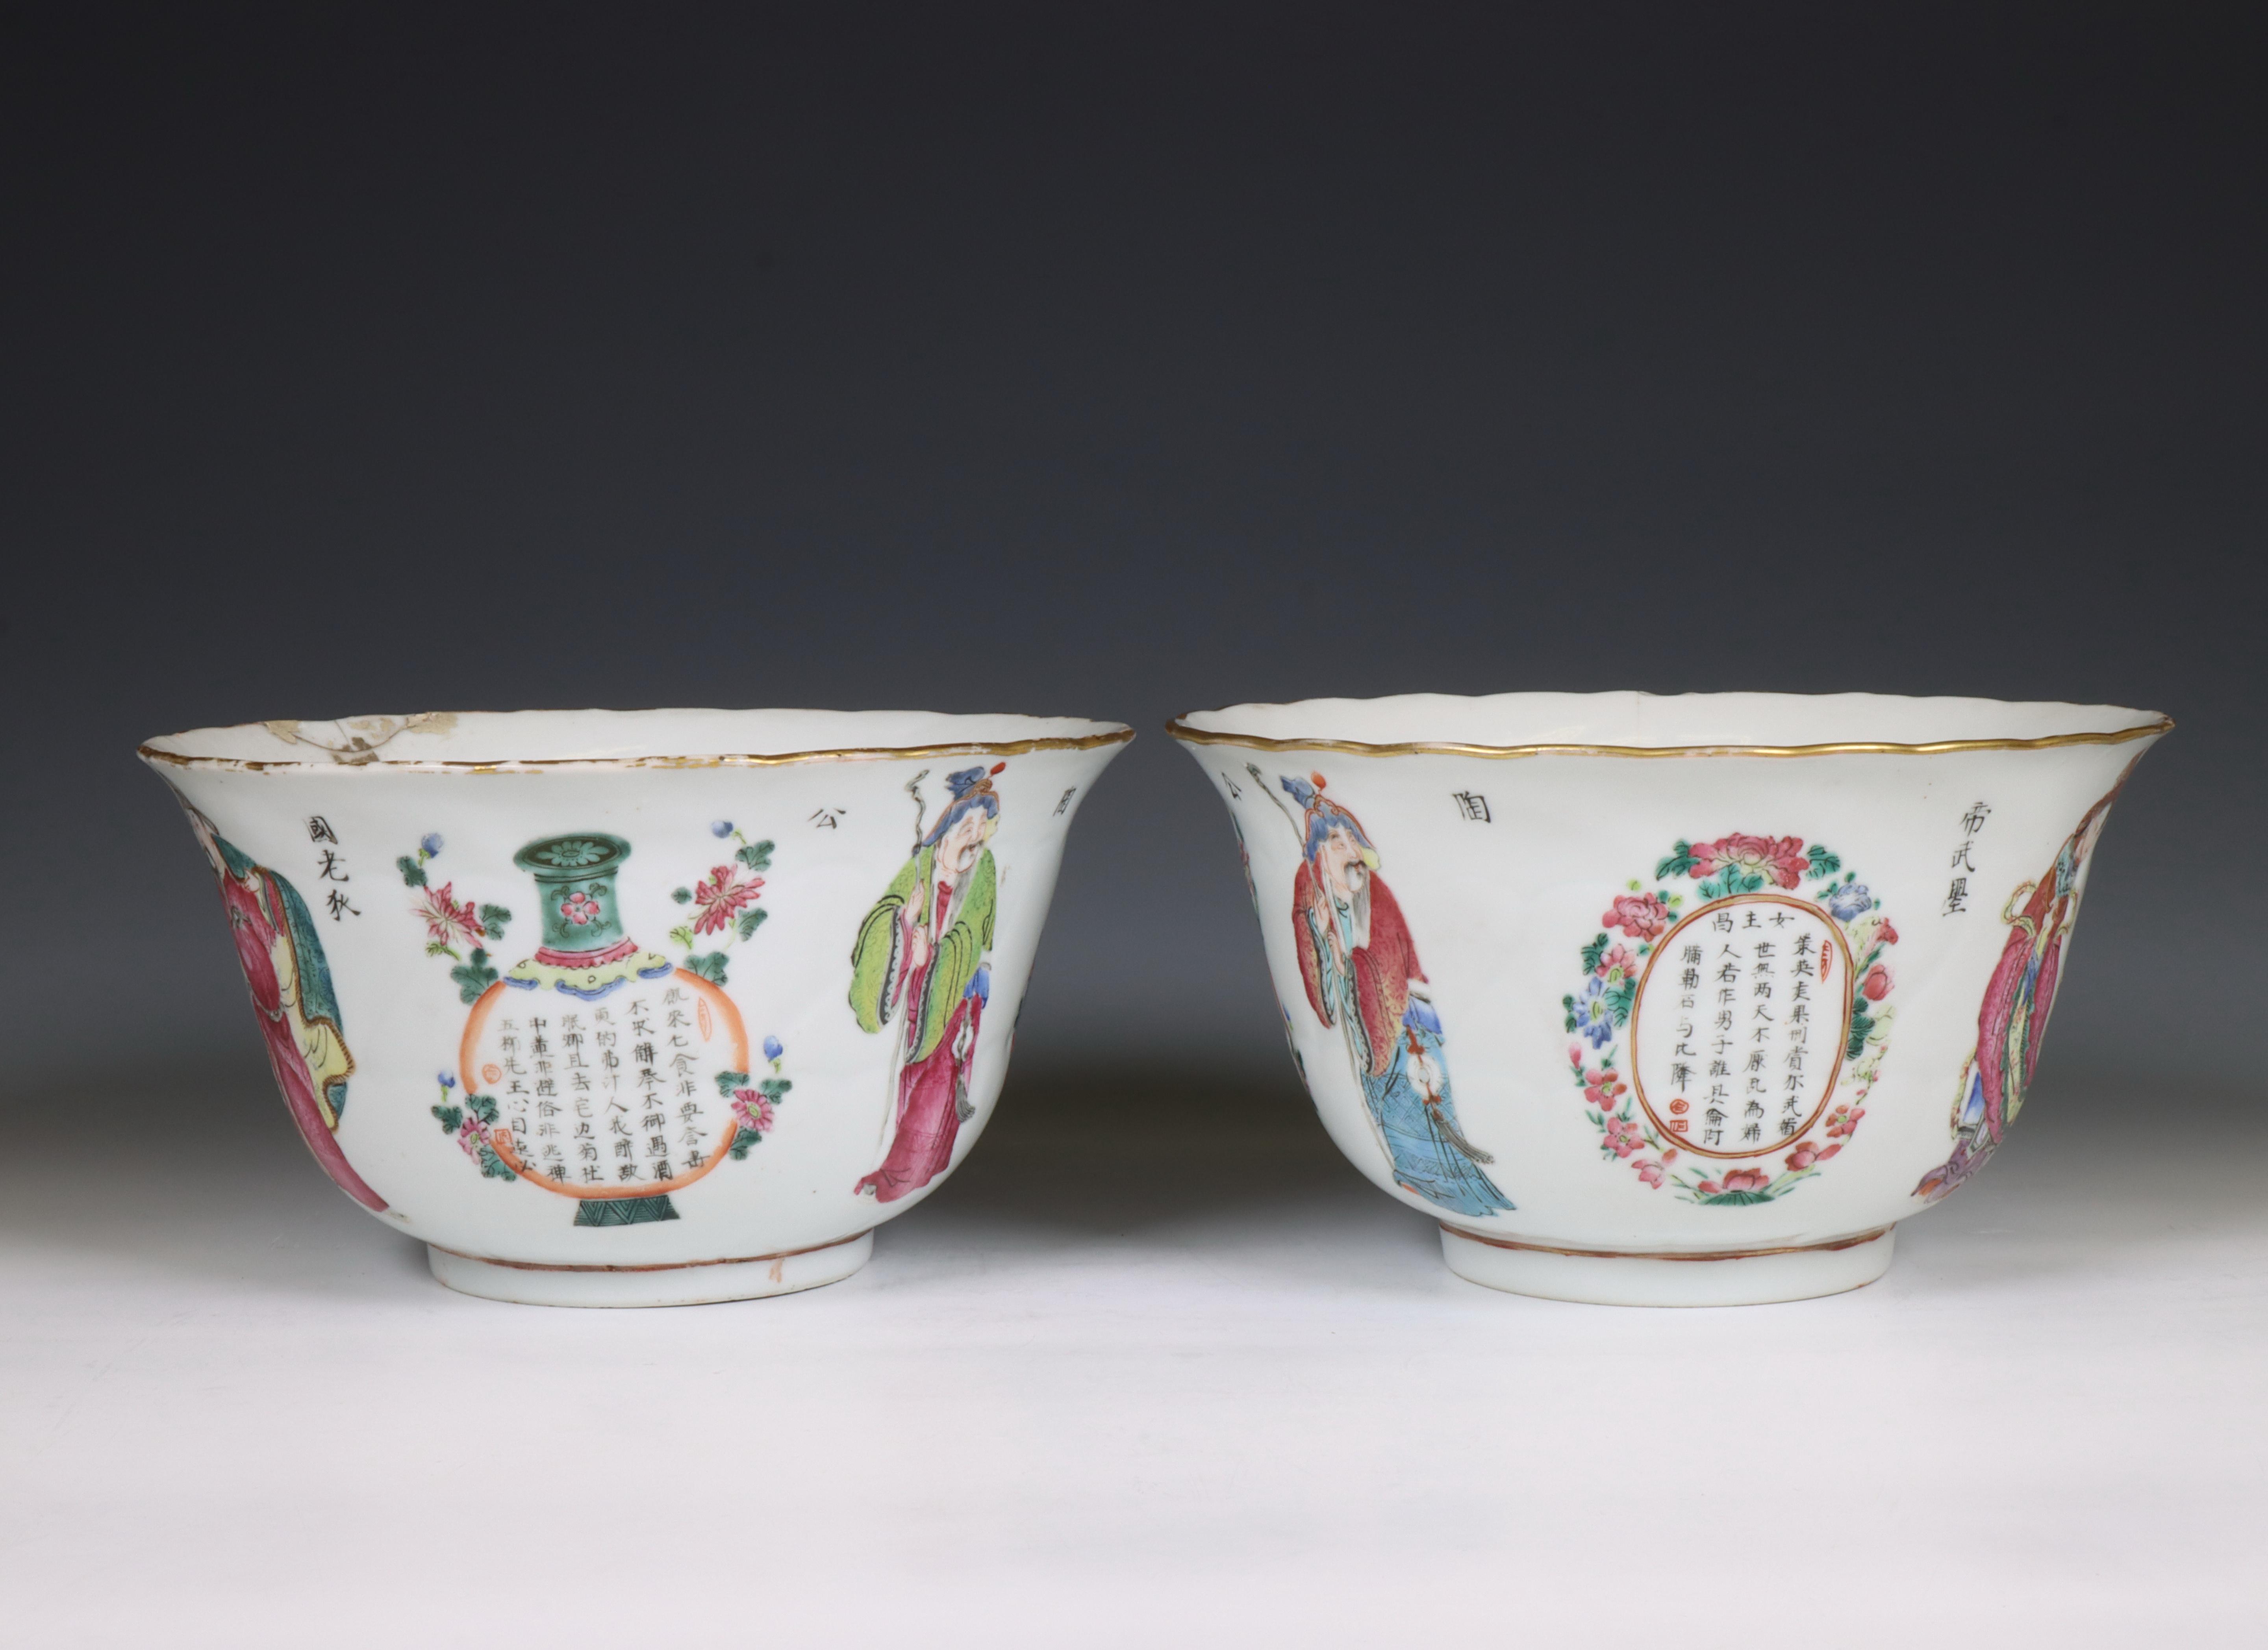 China, two famille rose porcelain 'Wu Shuang Pu' bowls, late Qing dynasty (1644-1912), - Image 5 of 9